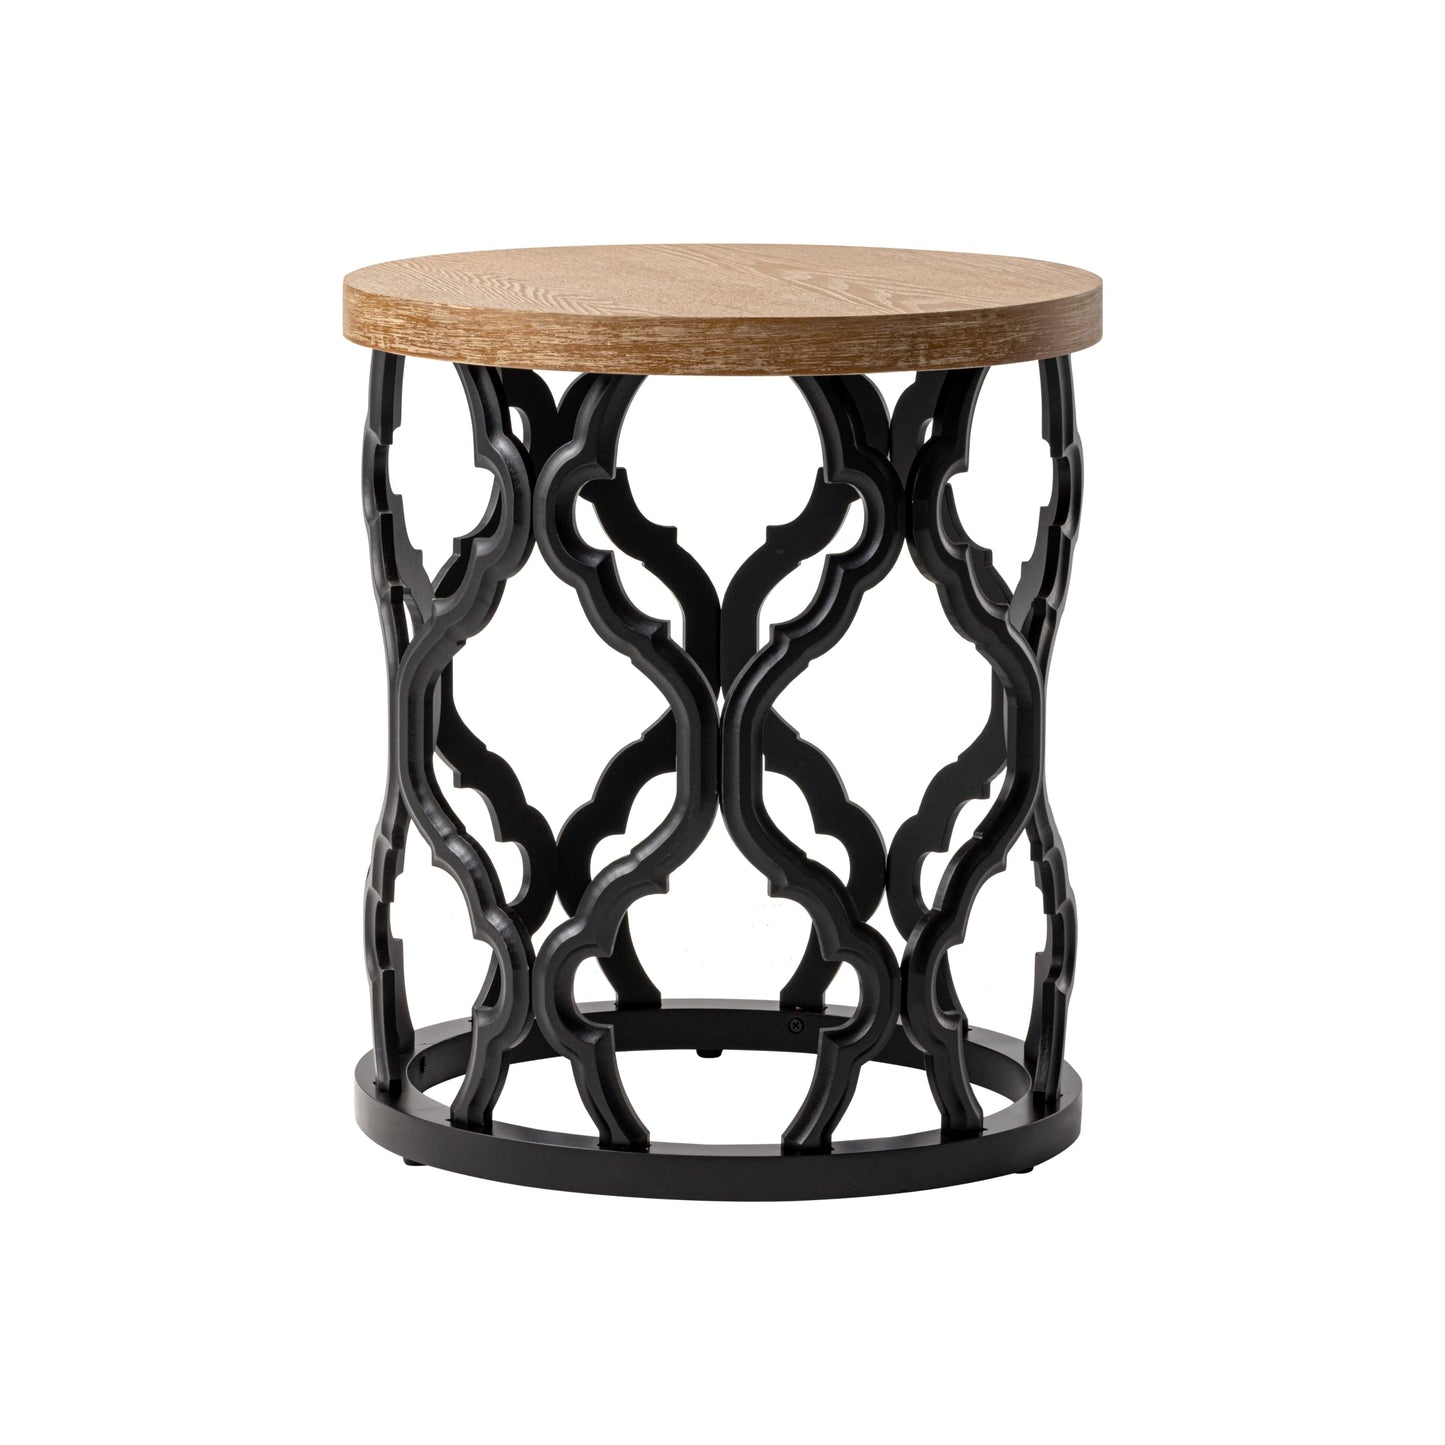 COZAYH Farmhouse End Table, Distressed Wood Top Side Table with Curved Motif Frame Base for Modern, Rustic, Round, Black